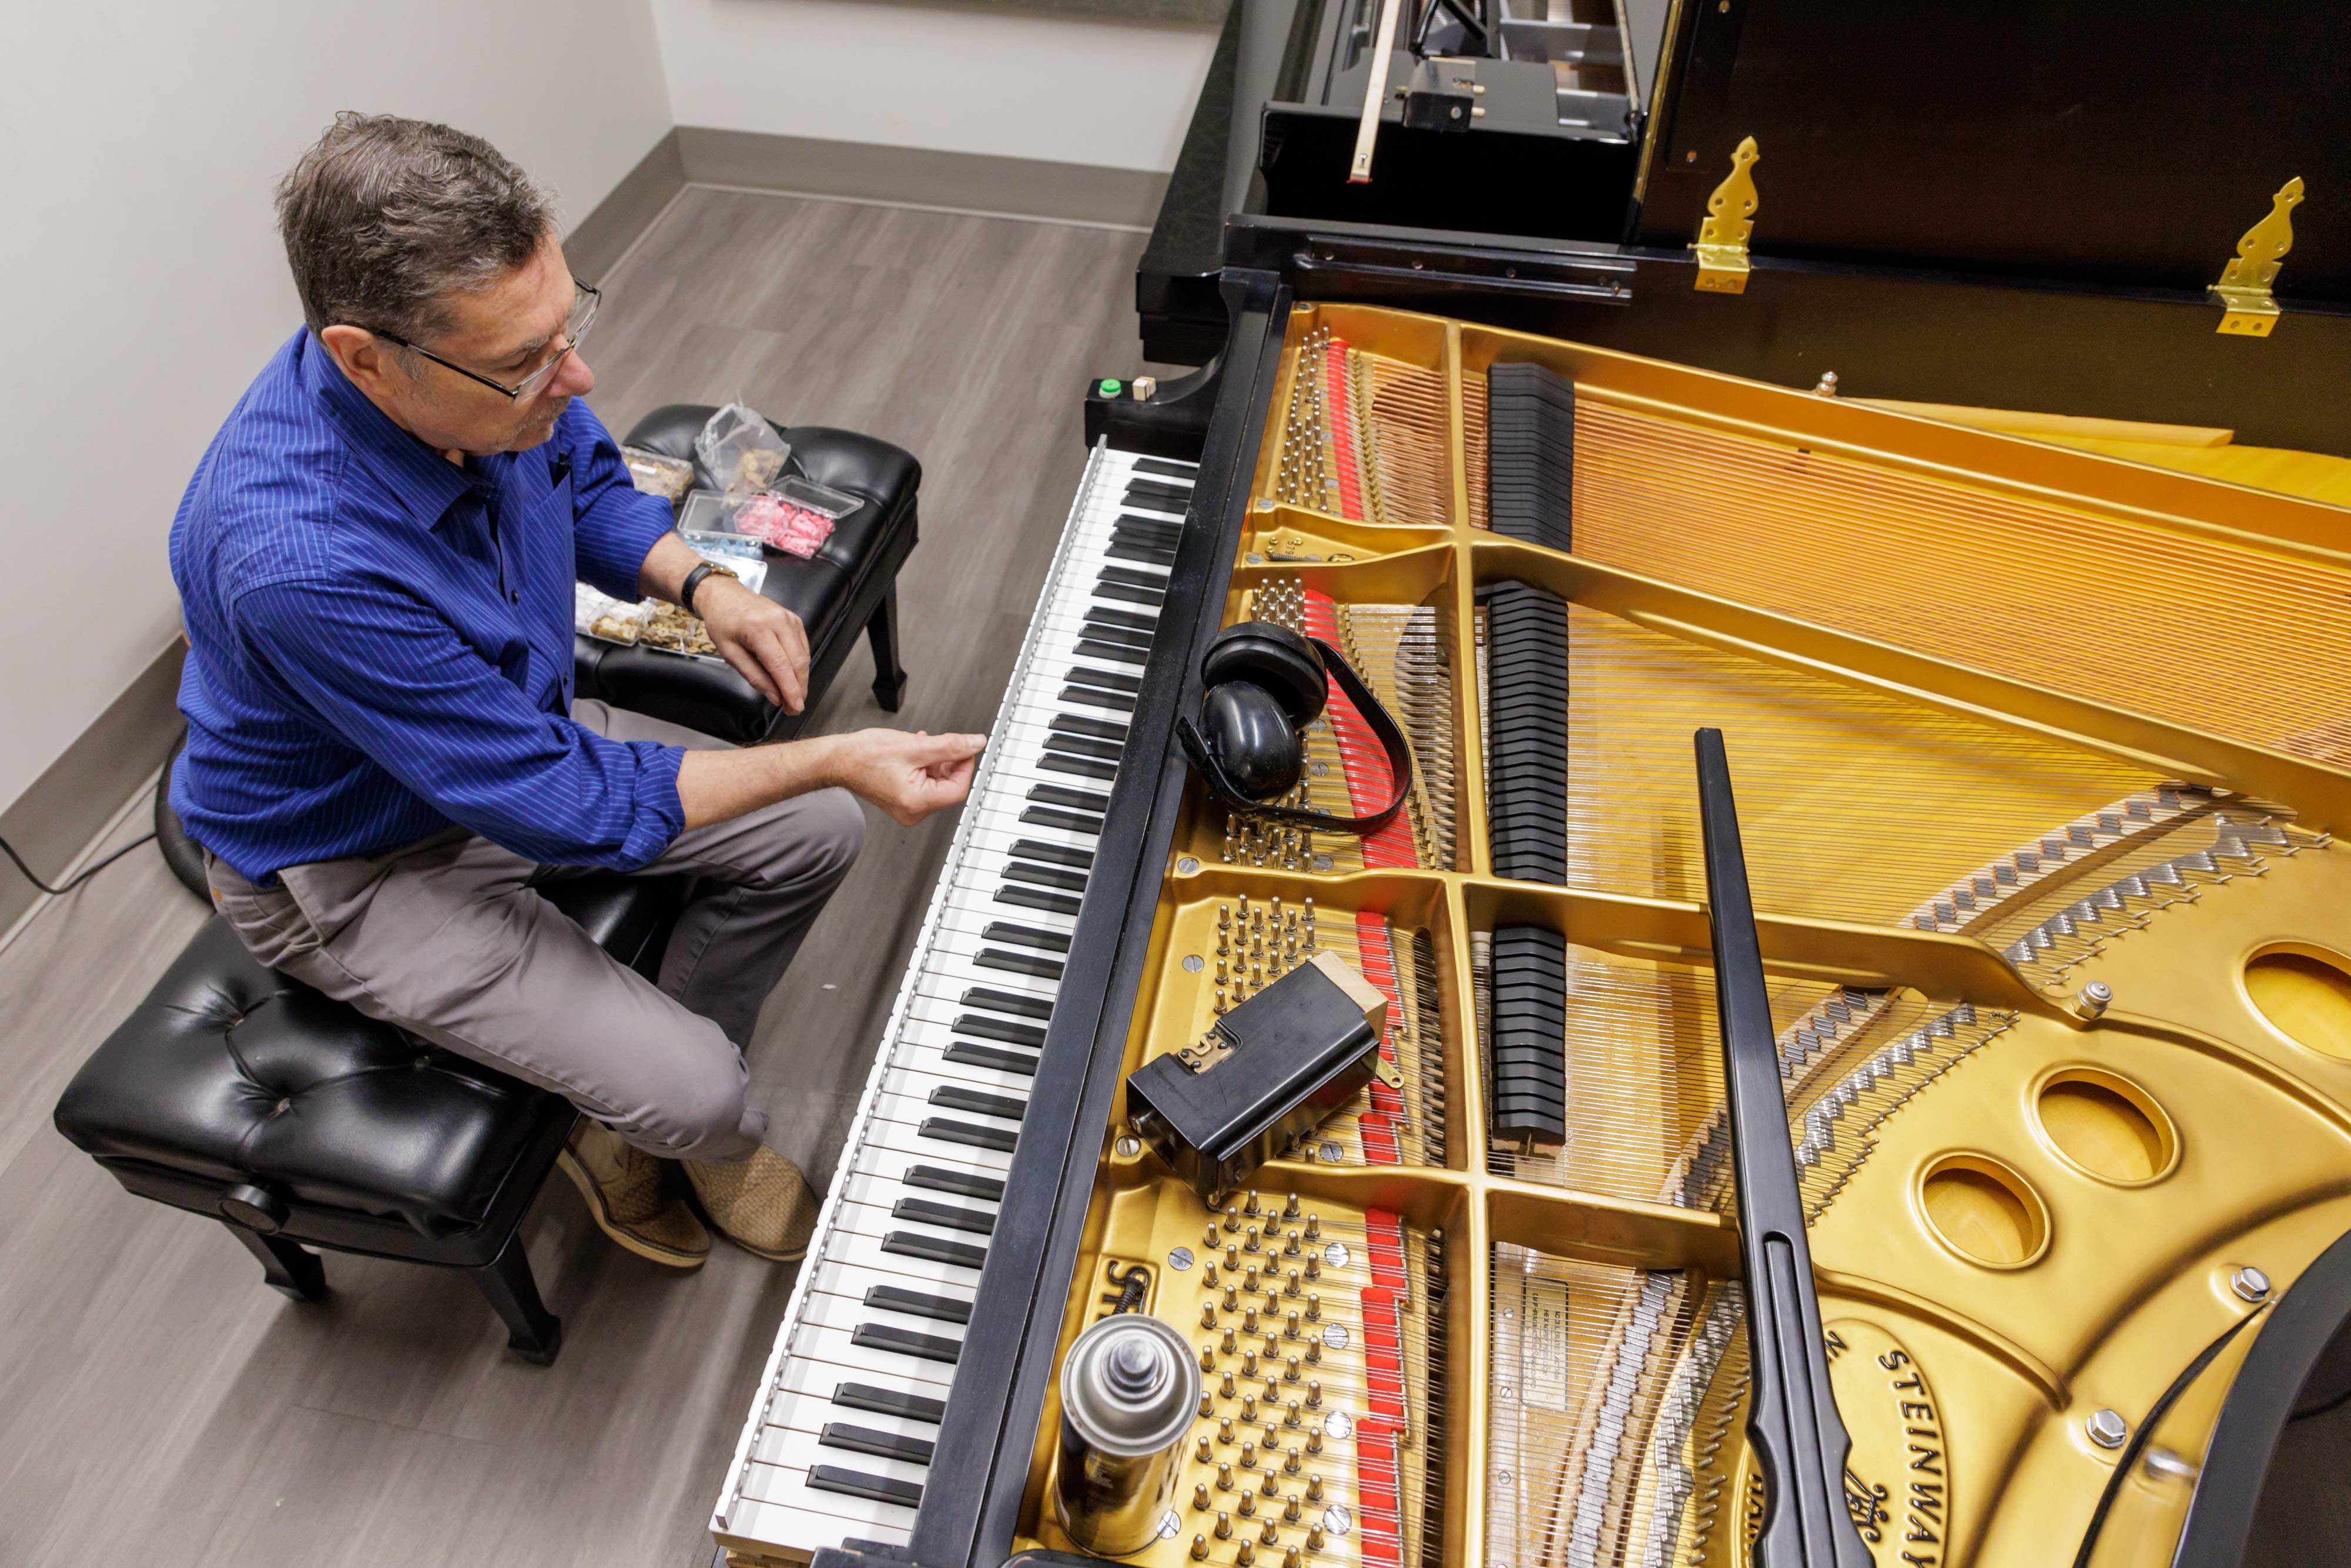 Mrykalo works to tune a piano in one of the practice rooms within the Greenwood School of Music.